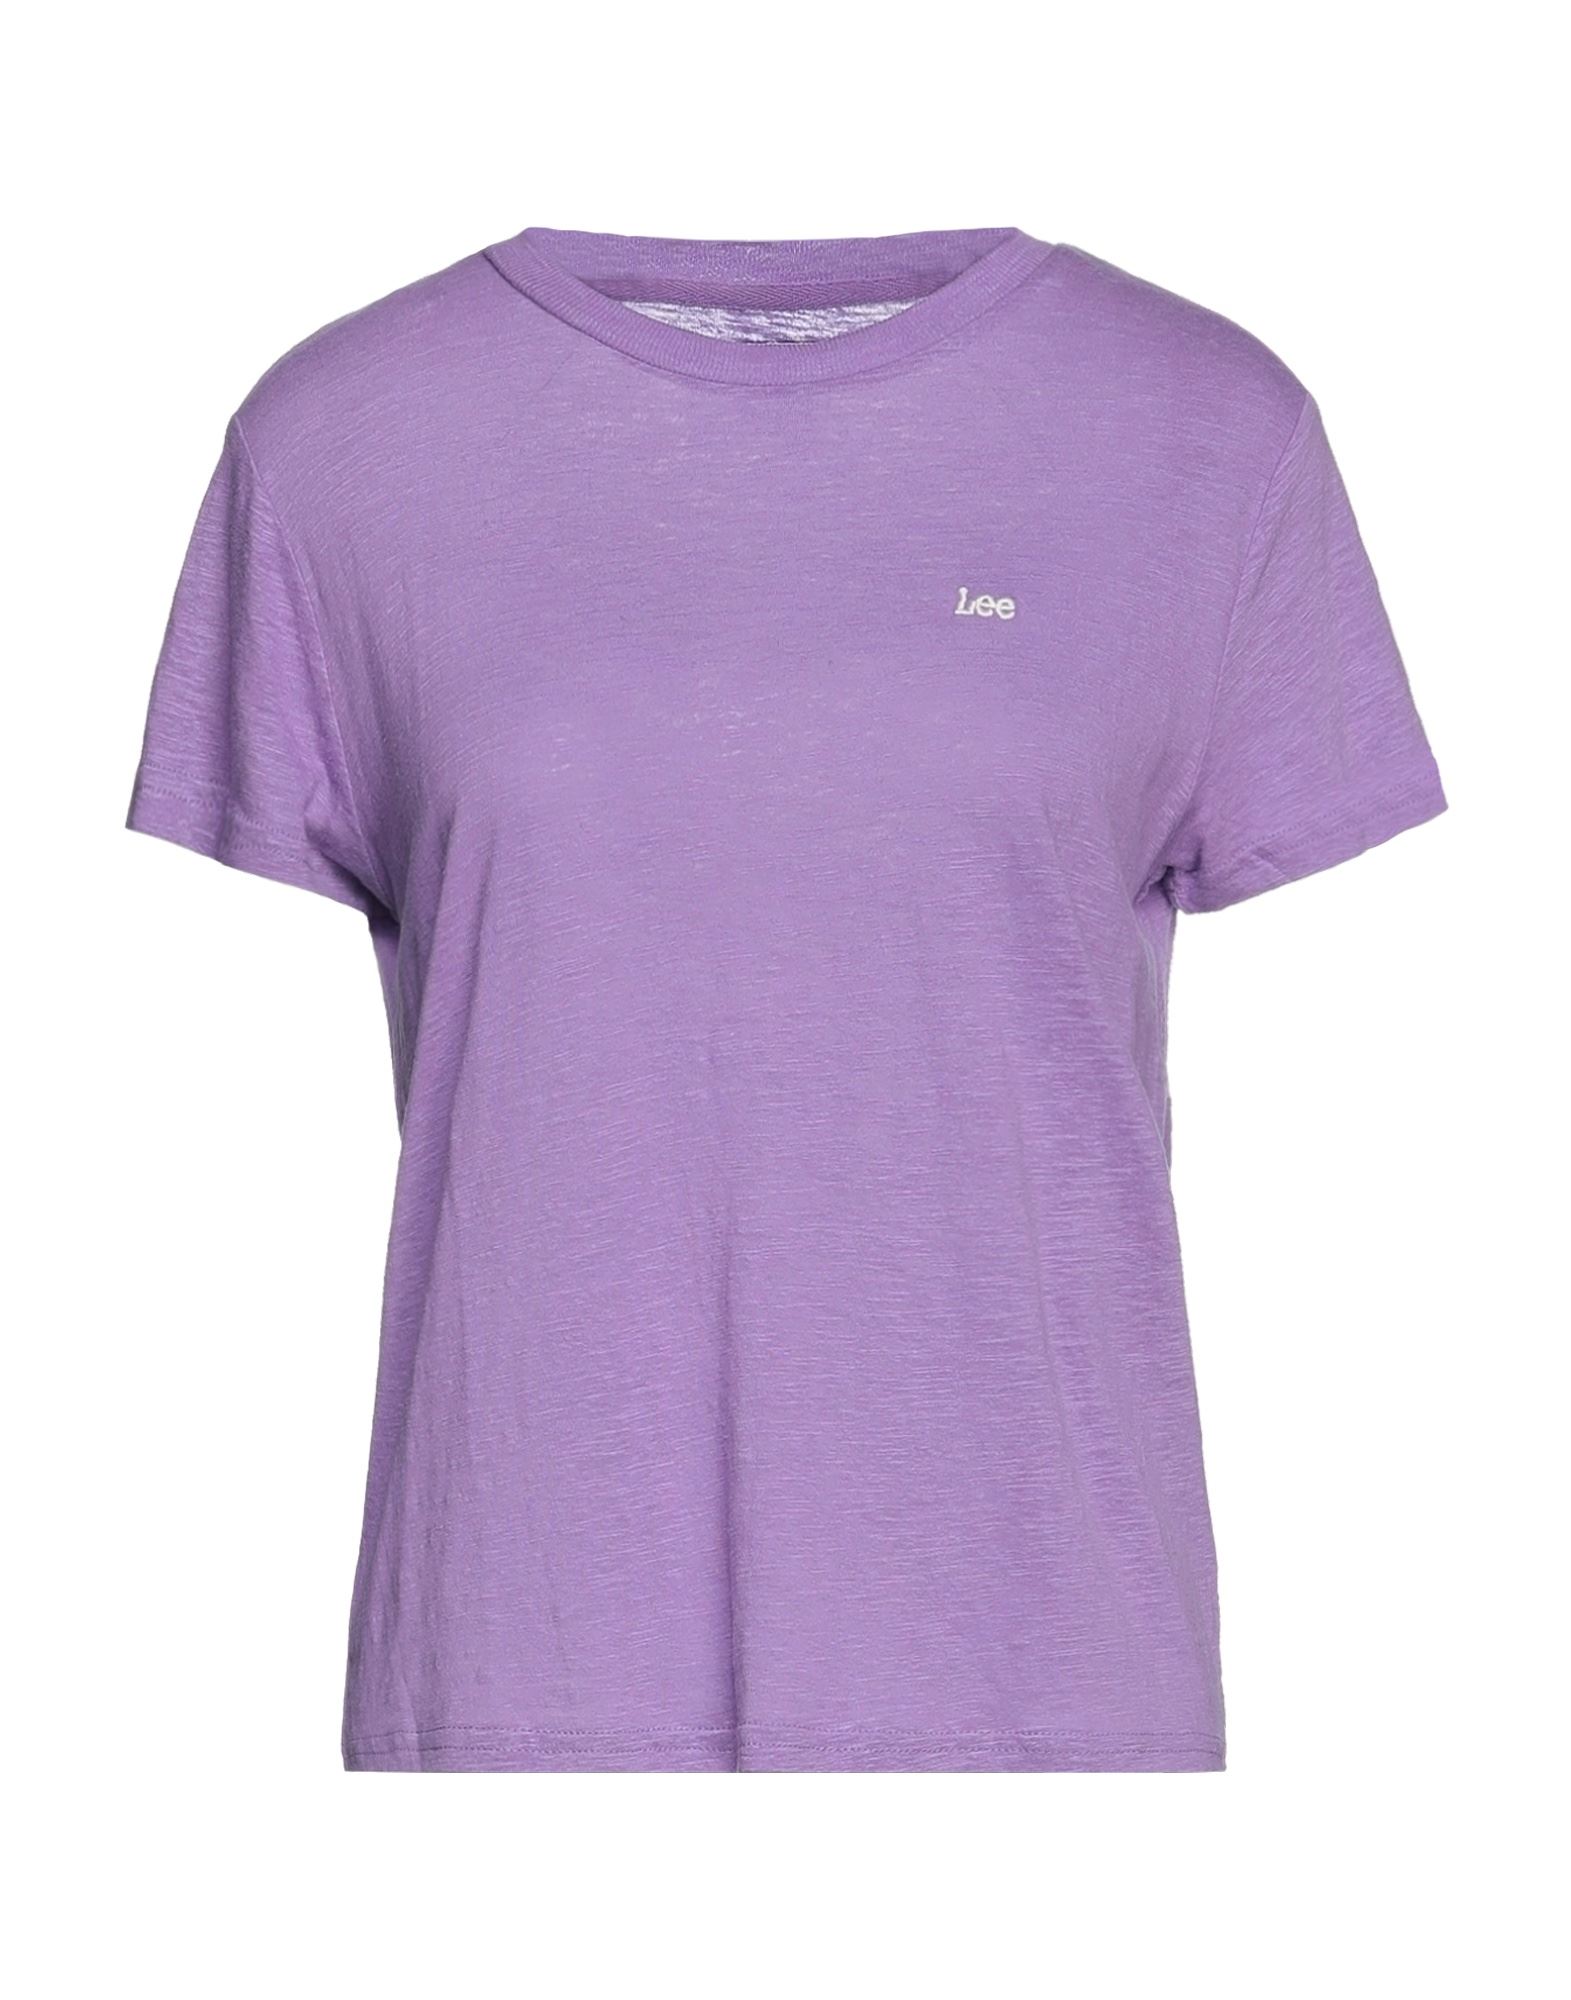 Lee T-shirts In Purple